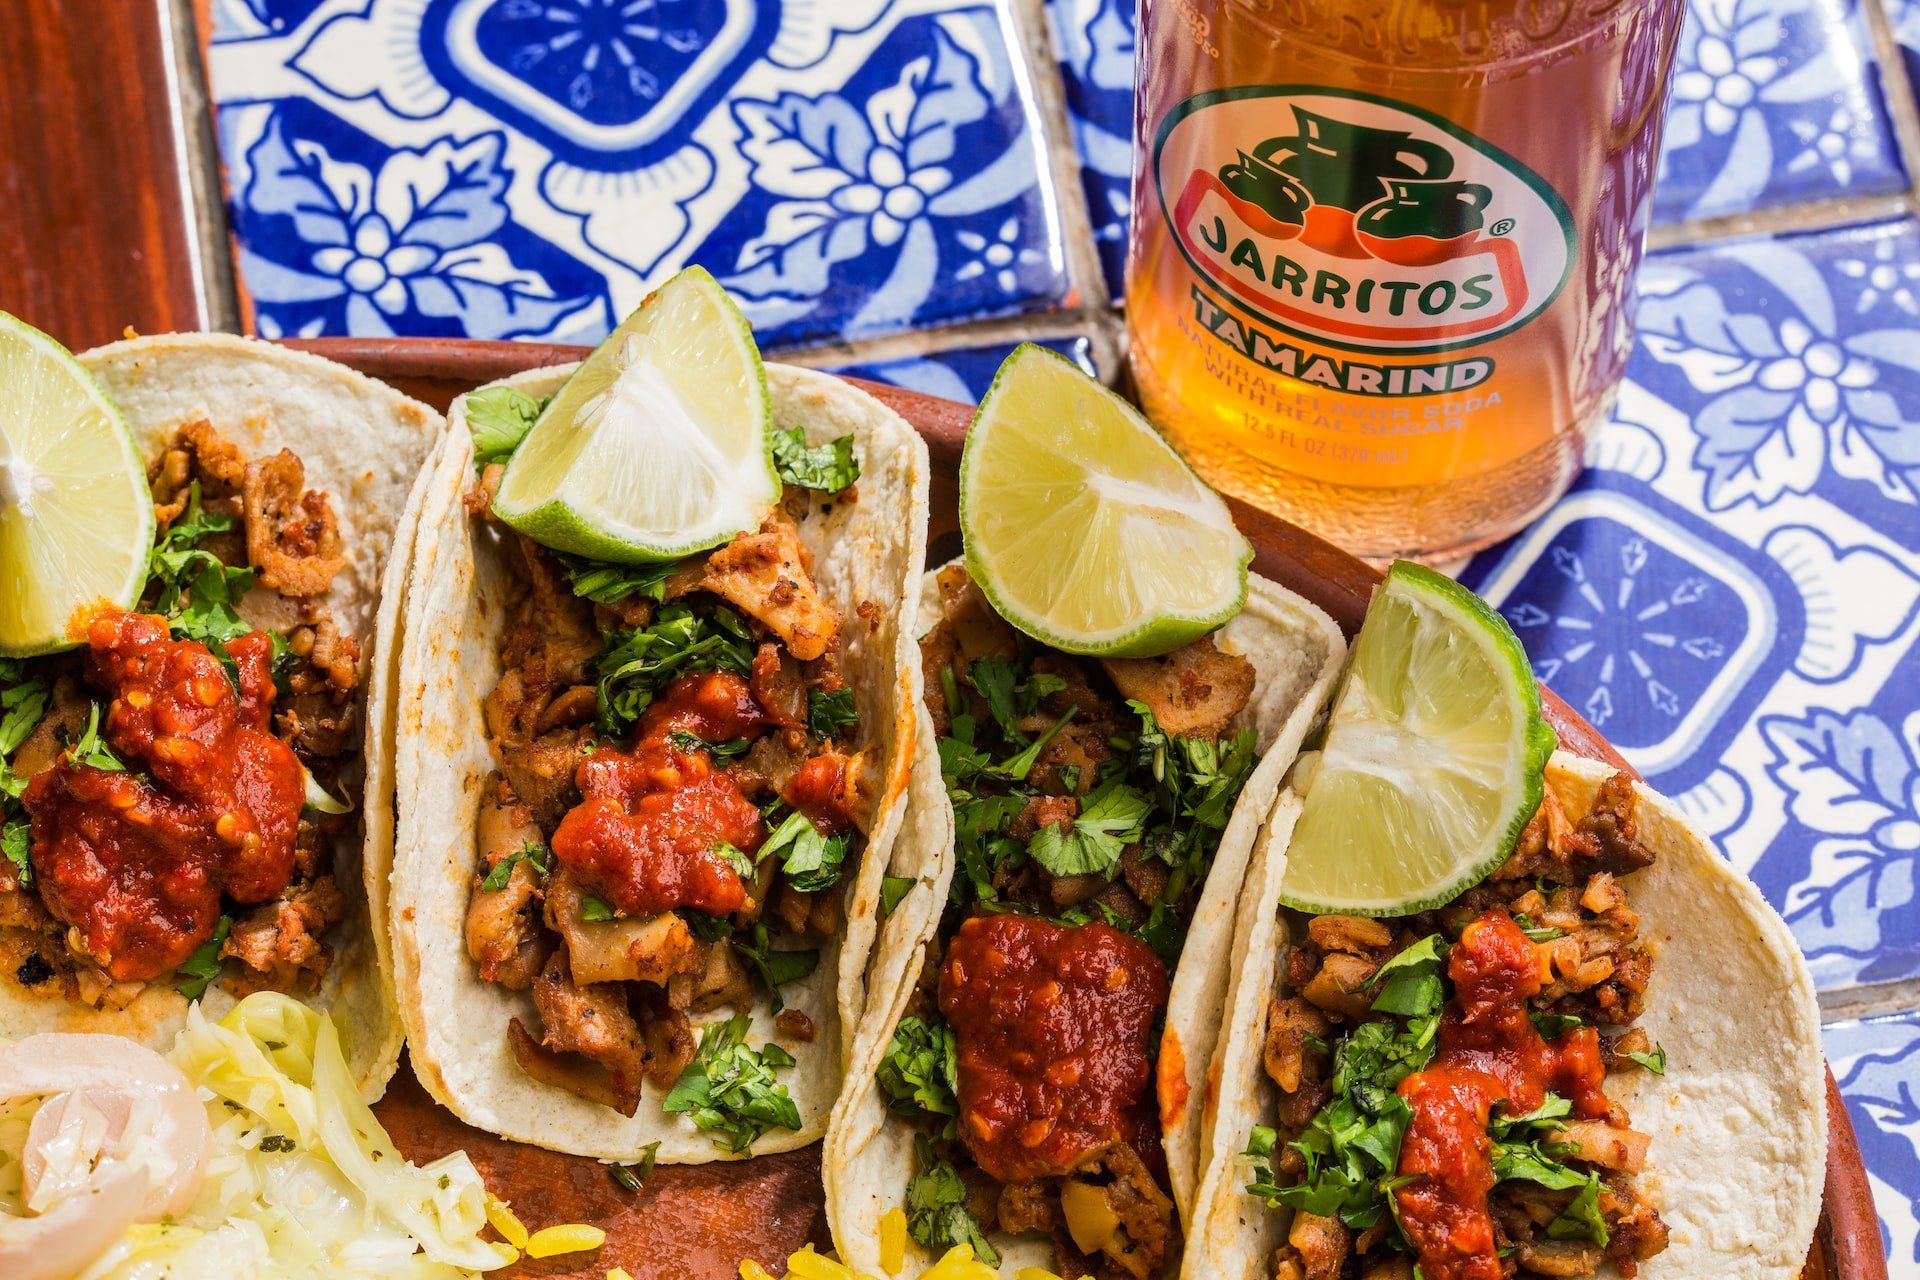 A close up of a plate of tacos next to a glass of beer.